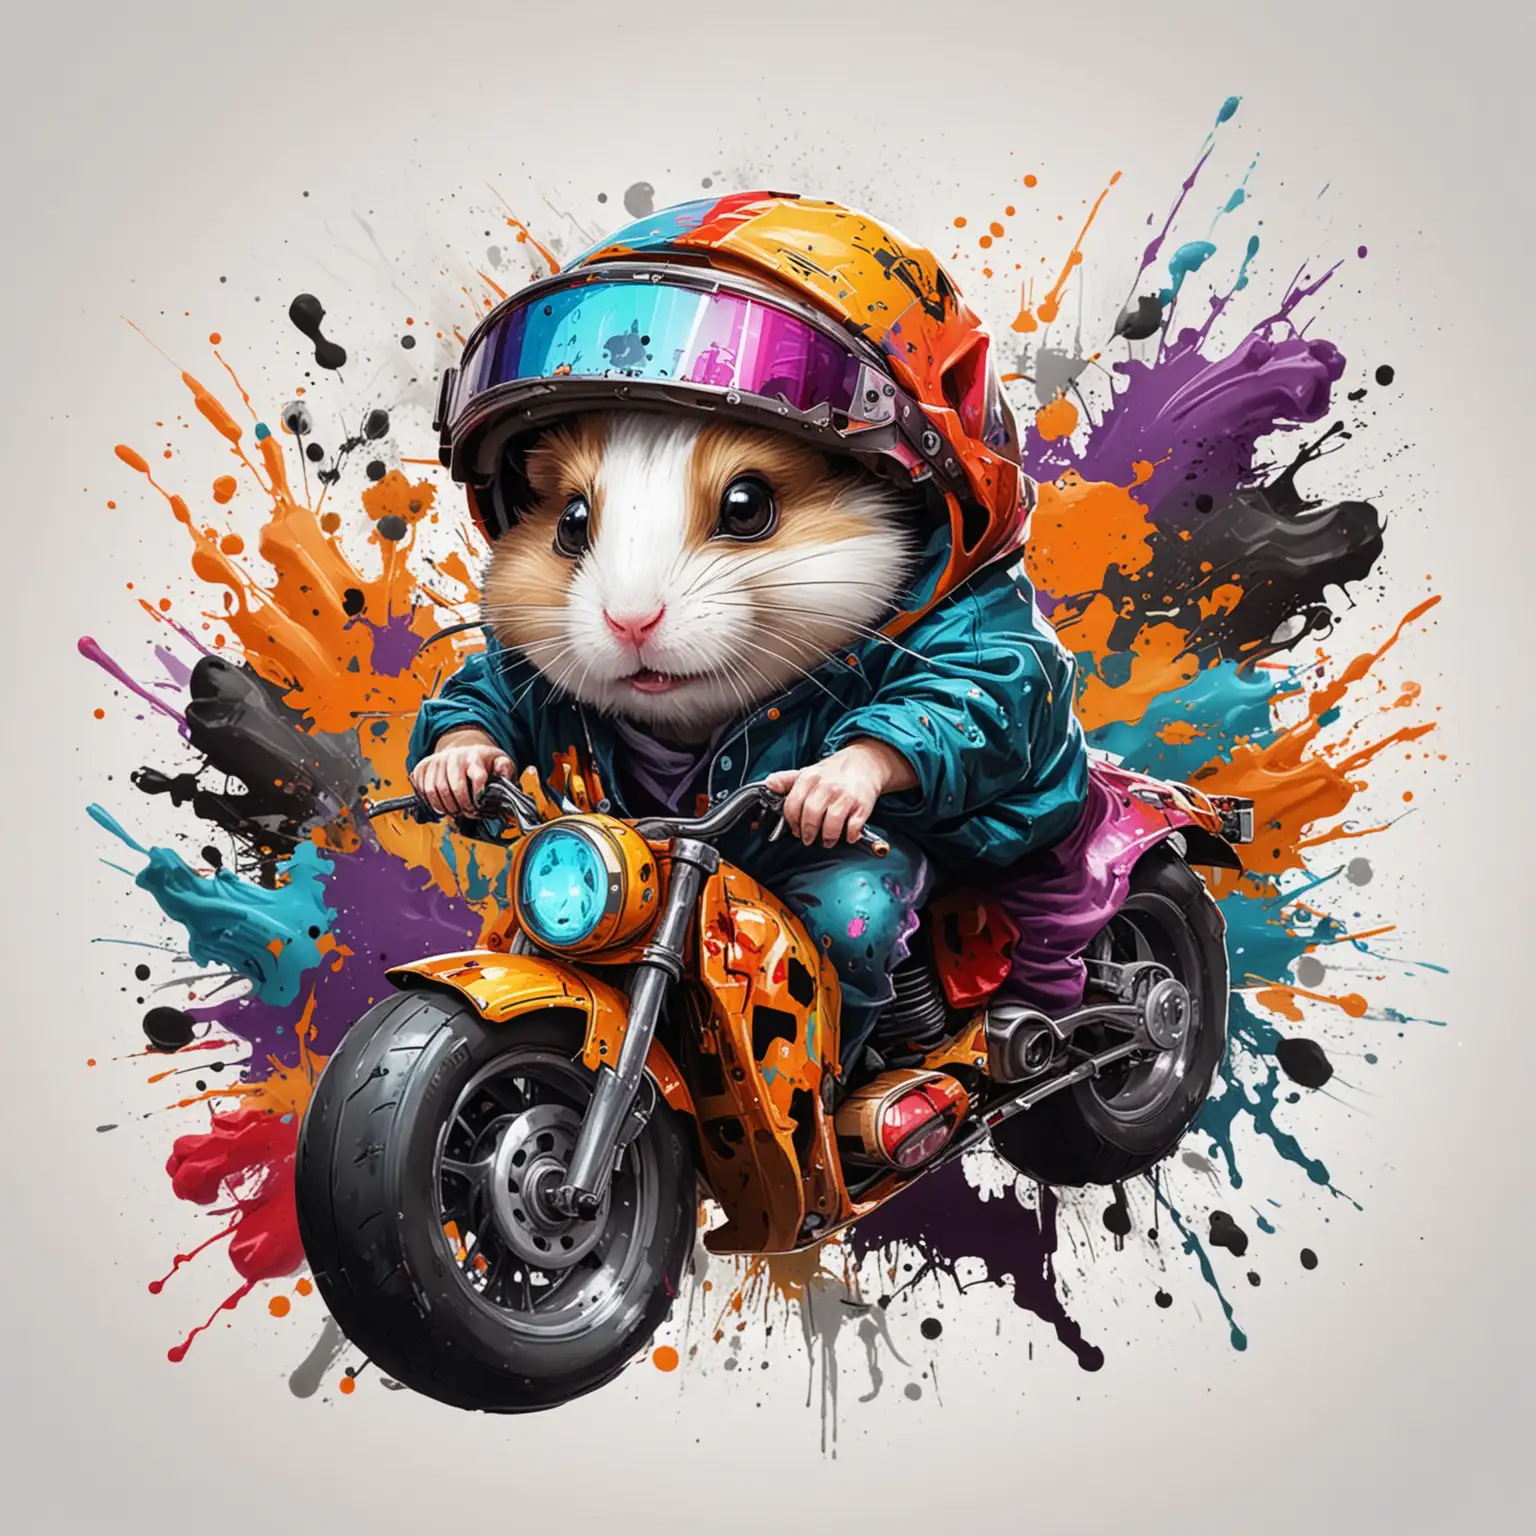 Colorful Abstract Hip Hop Halloween Painting with Hover Hamster and Motor Bike